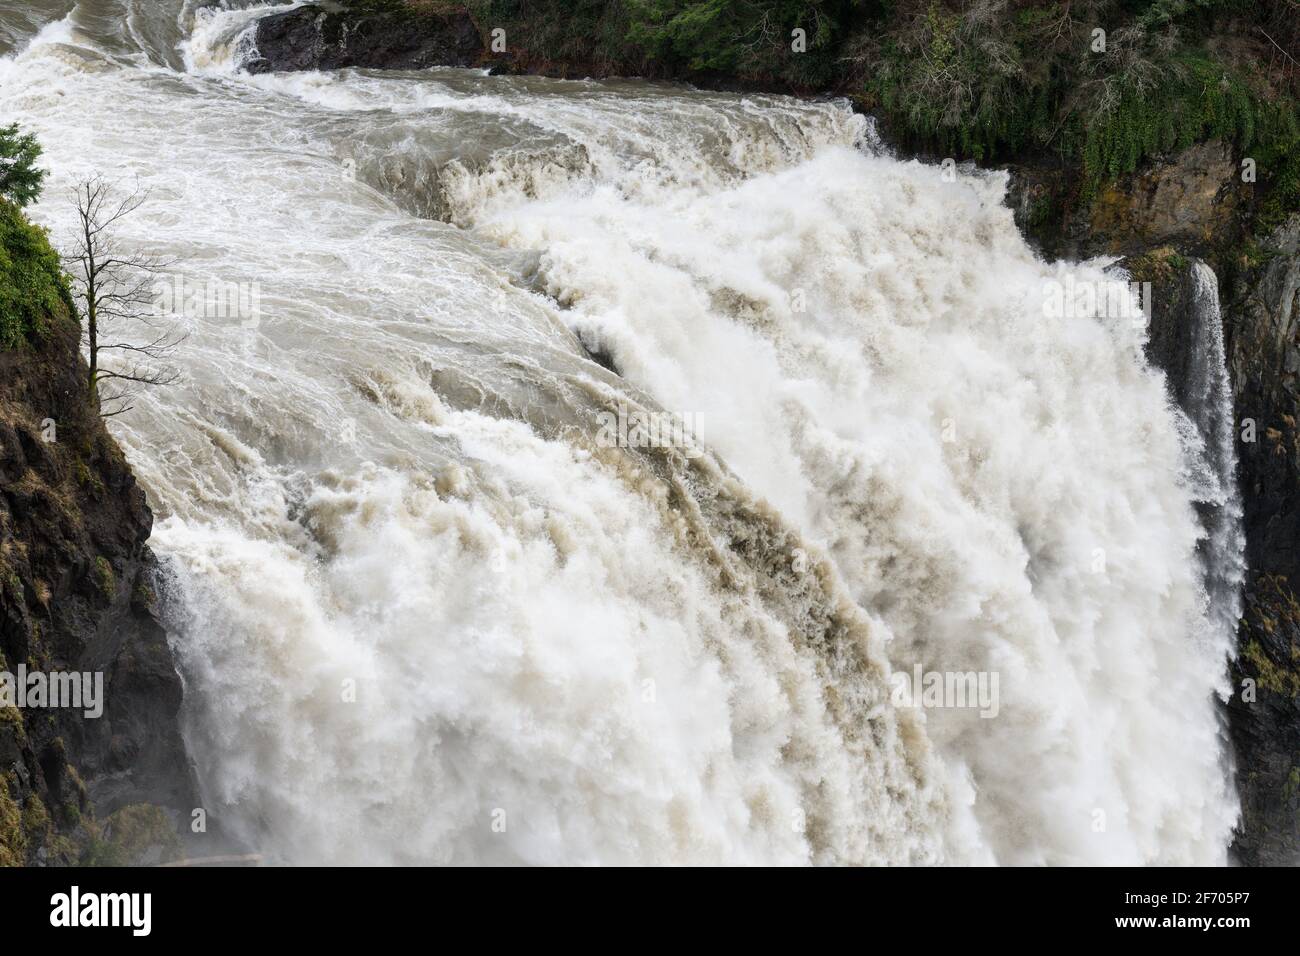 Water plunges with extreme force over the edge of the Snoqualmie Falls waterfall during a flood creating layers of texture between the rock walls Stock Photo